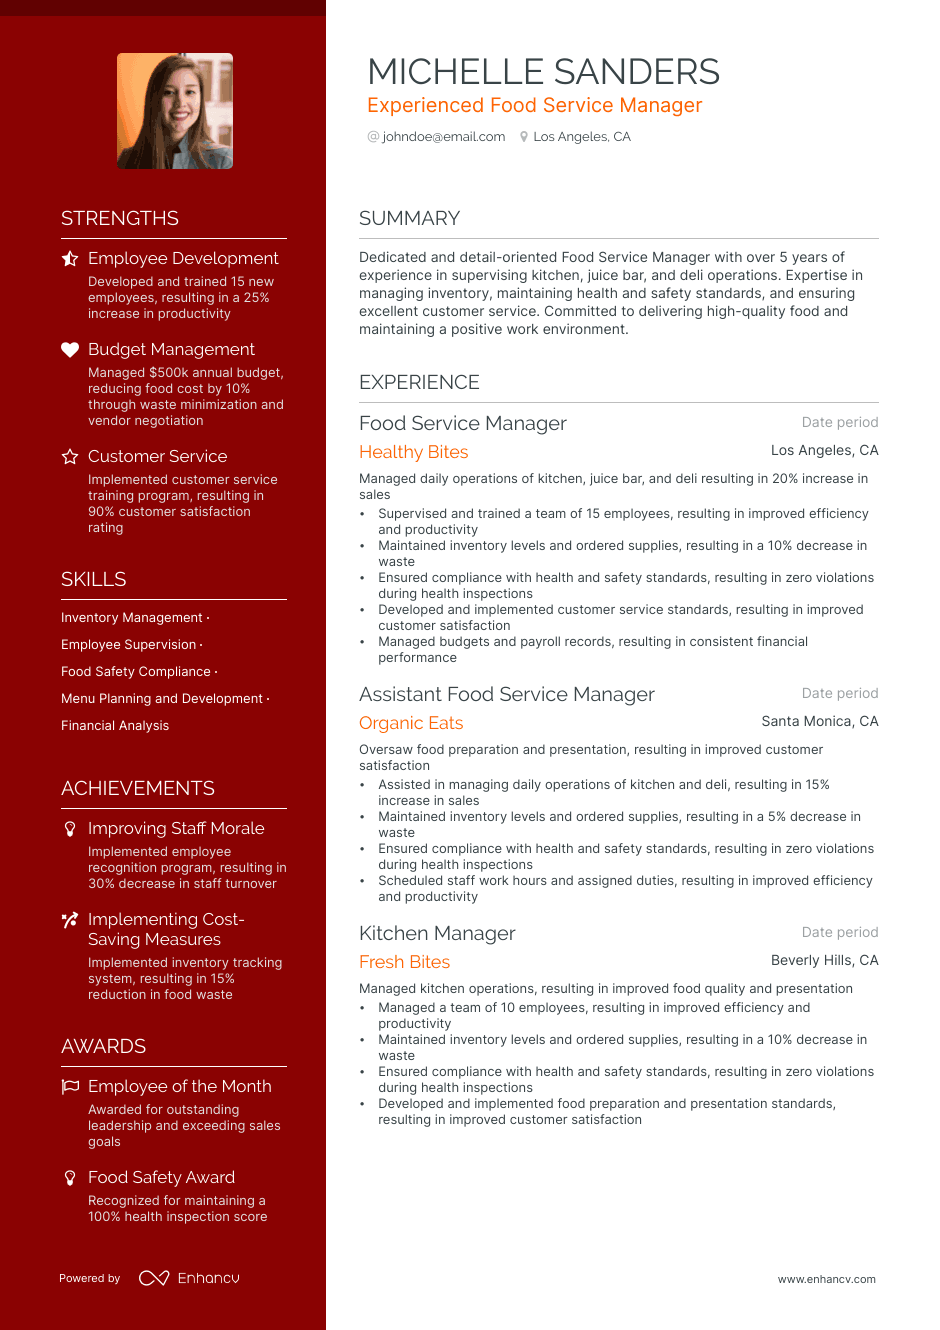 Food Service Manager resume example